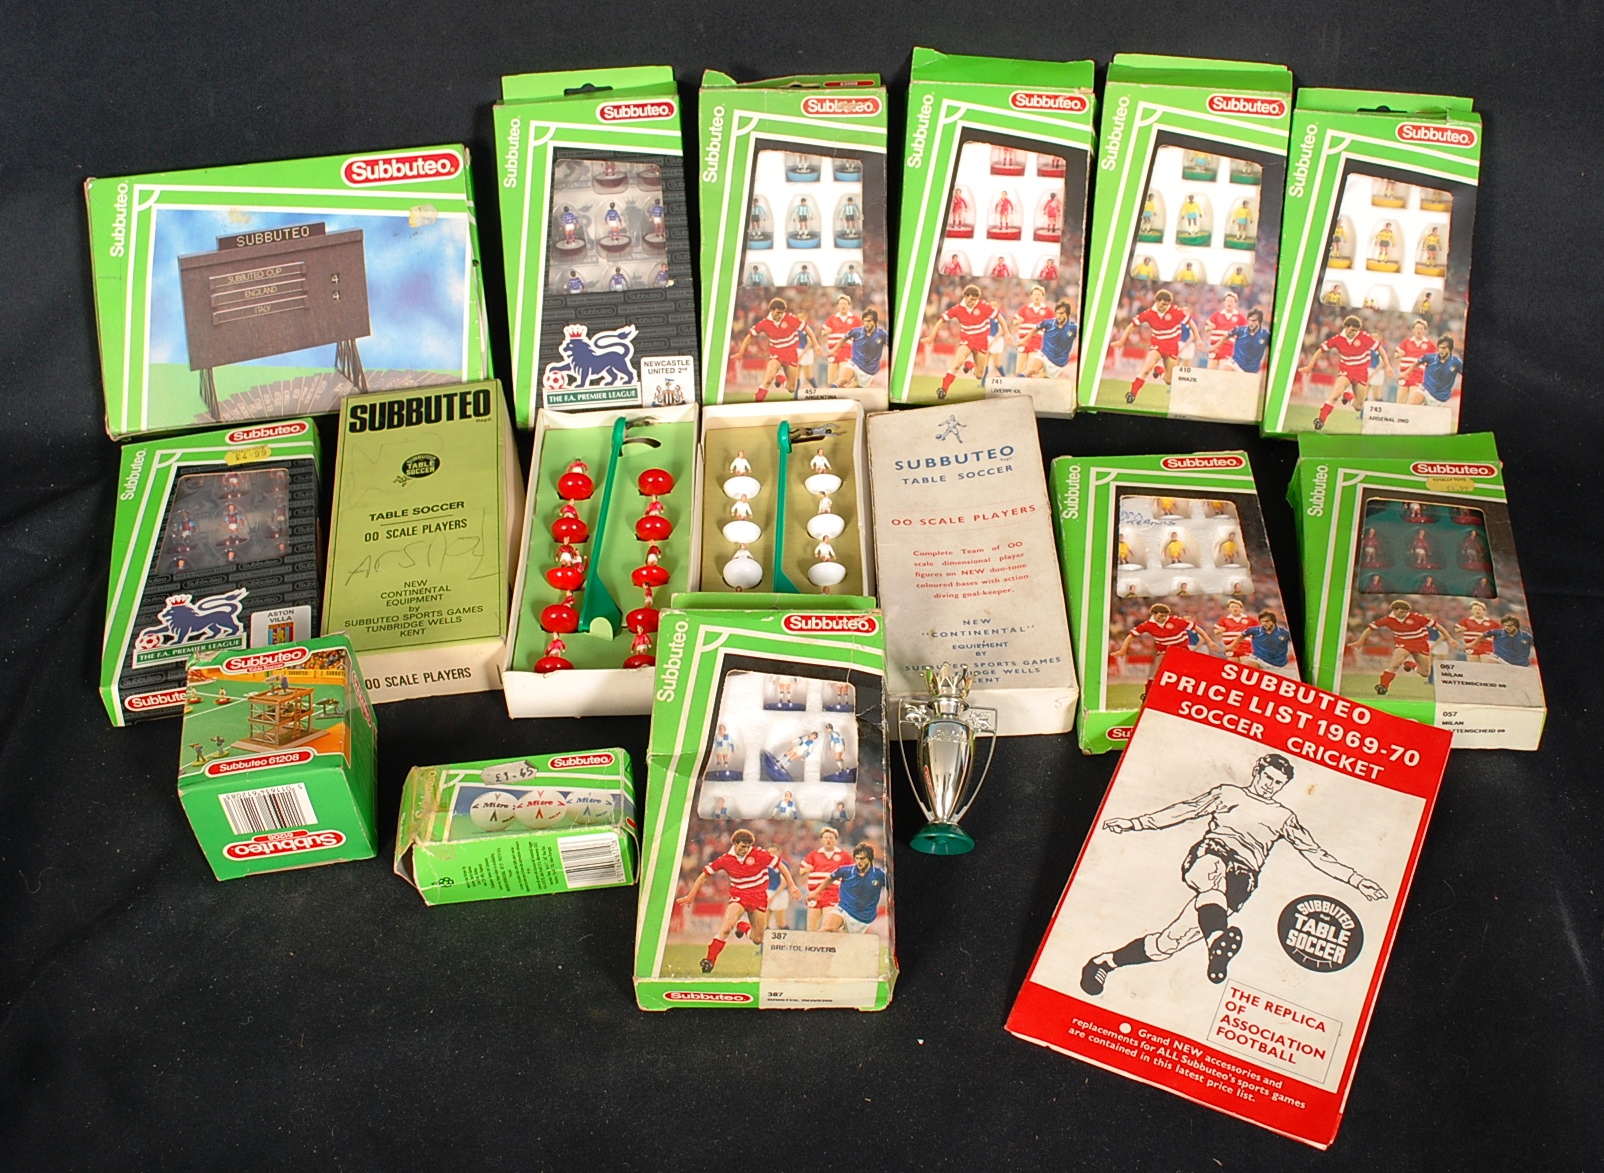 A box to contain a quantity of Subbuteo football accessories and toys, along with a 1969 trade